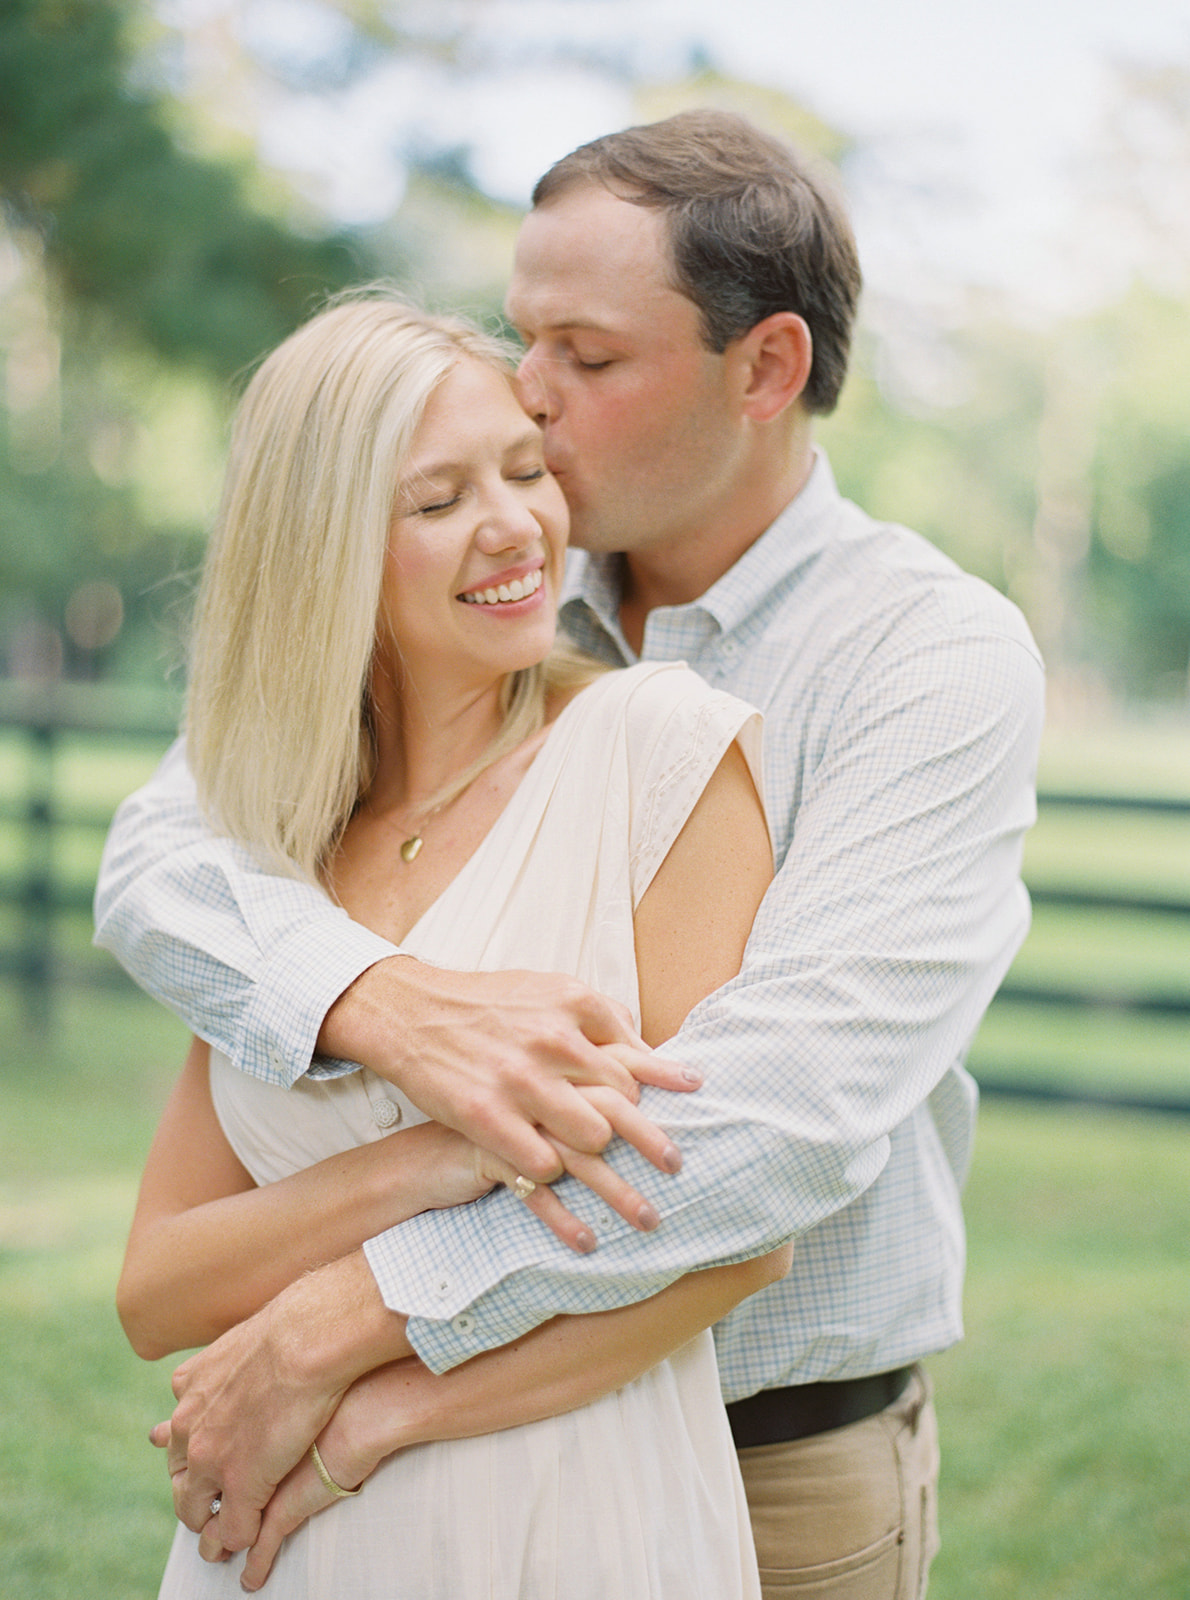 Engagement Session couple kissing on forehead during golden hour in Thomasville, Georgia. Film using Contax645